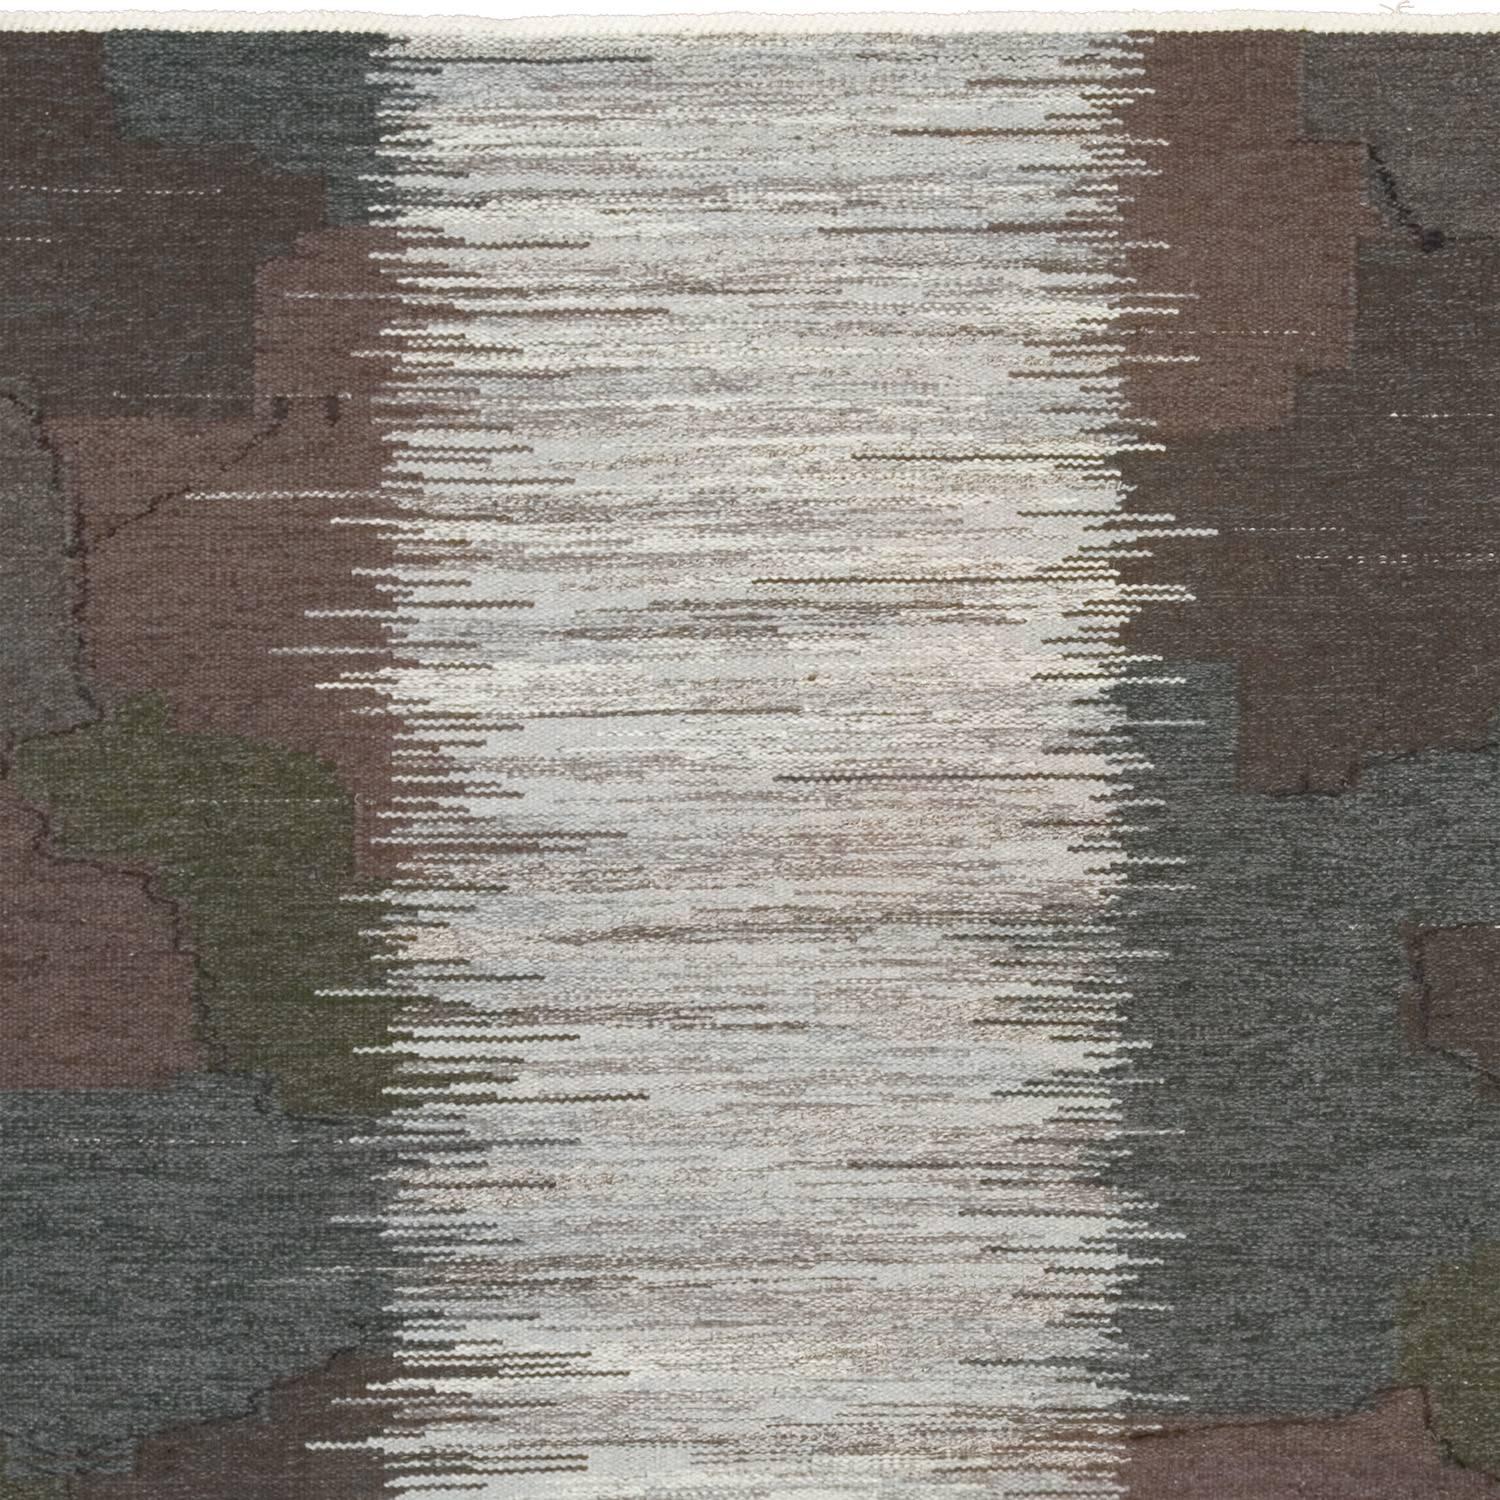 20th Century Swedish Flat-Weave Carpet by Alice Lund In Excellent Condition For Sale In New York, NY